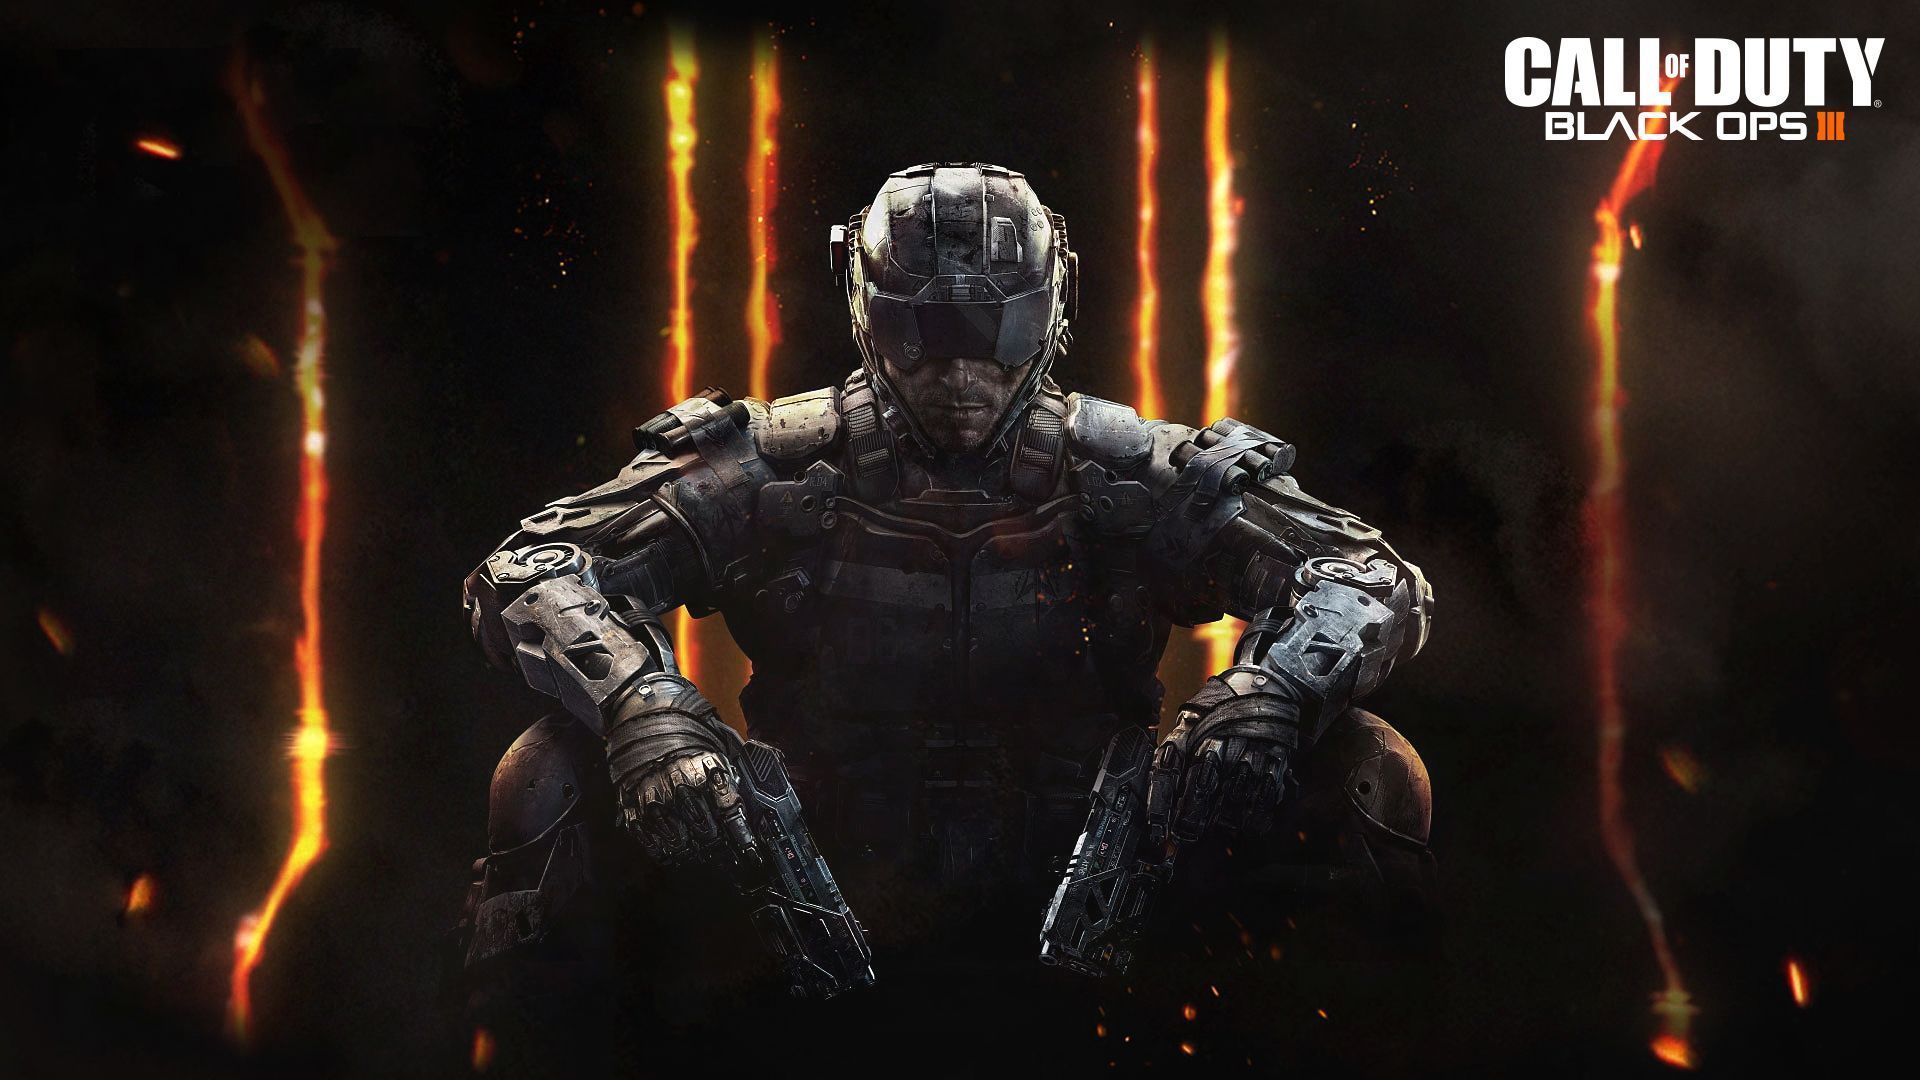 Black Ops 3 Wallpapers BO3 - Free Download - Unofficial Call of Duty